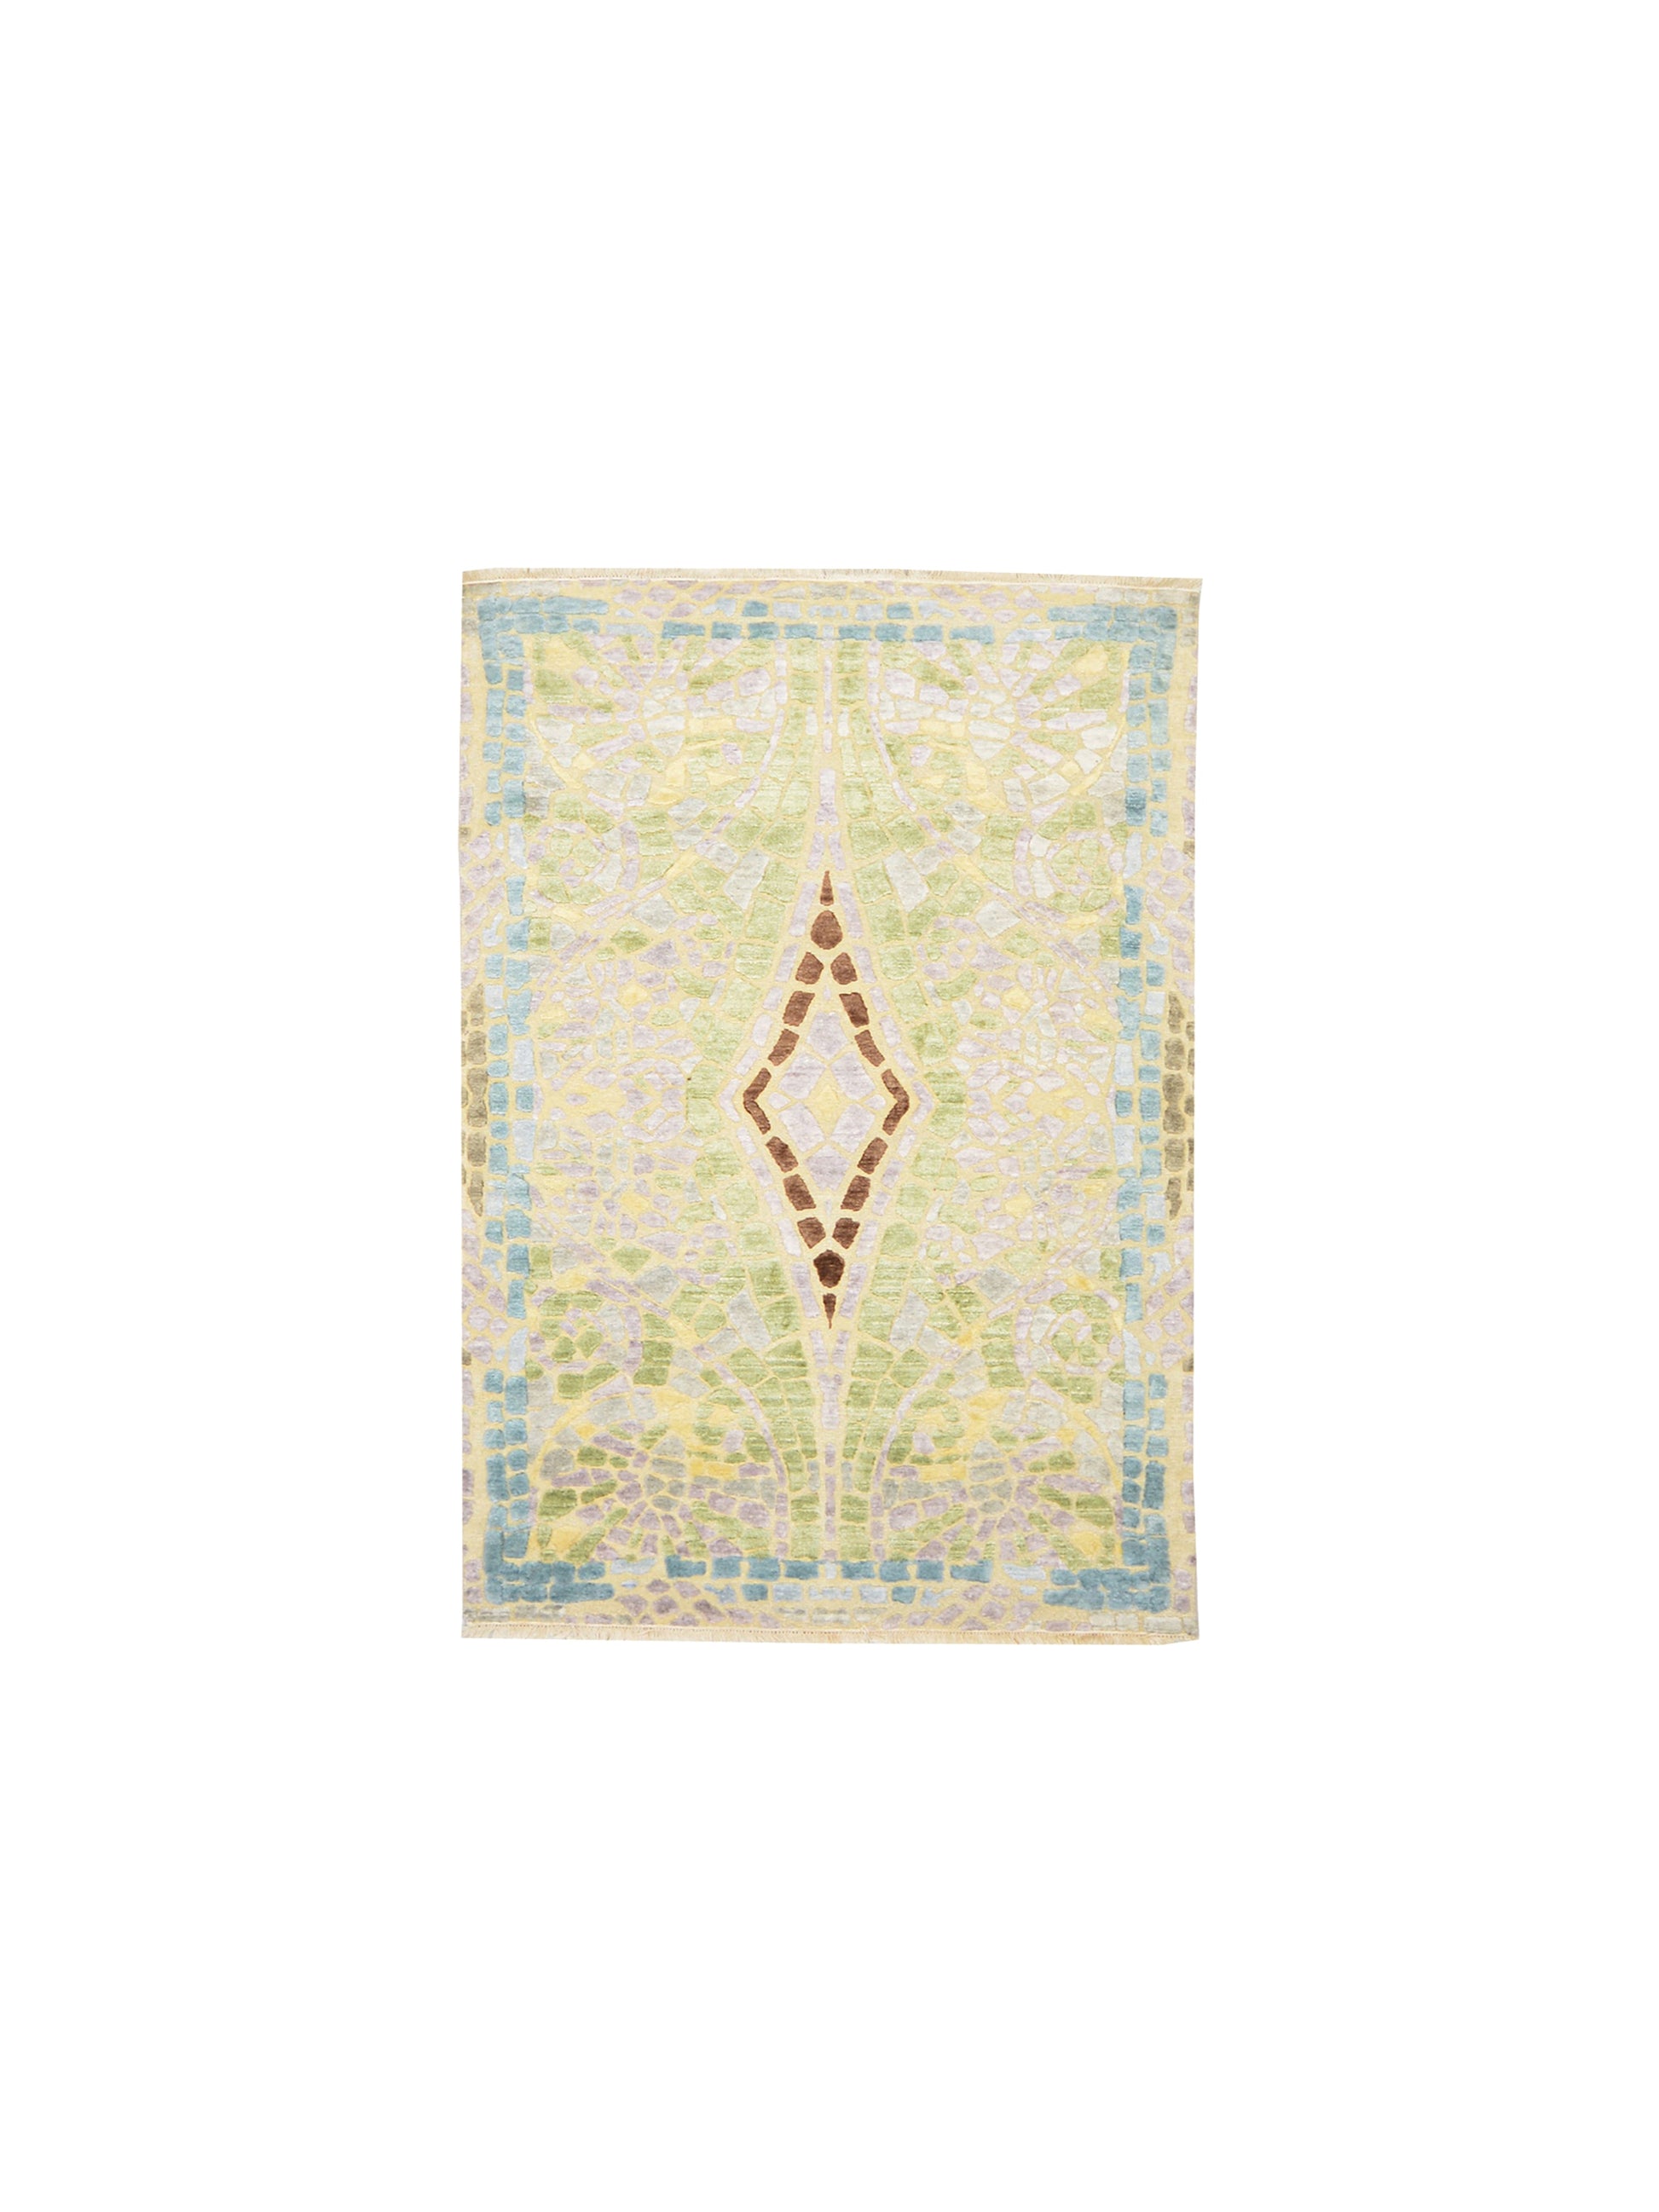 Get trendy with Grey Multi Silk Wool Modern Handknotted Area Rug 3.11x6.3ft 121x189Cms - Modern Rugs available at Jaipur Oriental Rugs. Grab yours for $1320.00 today!